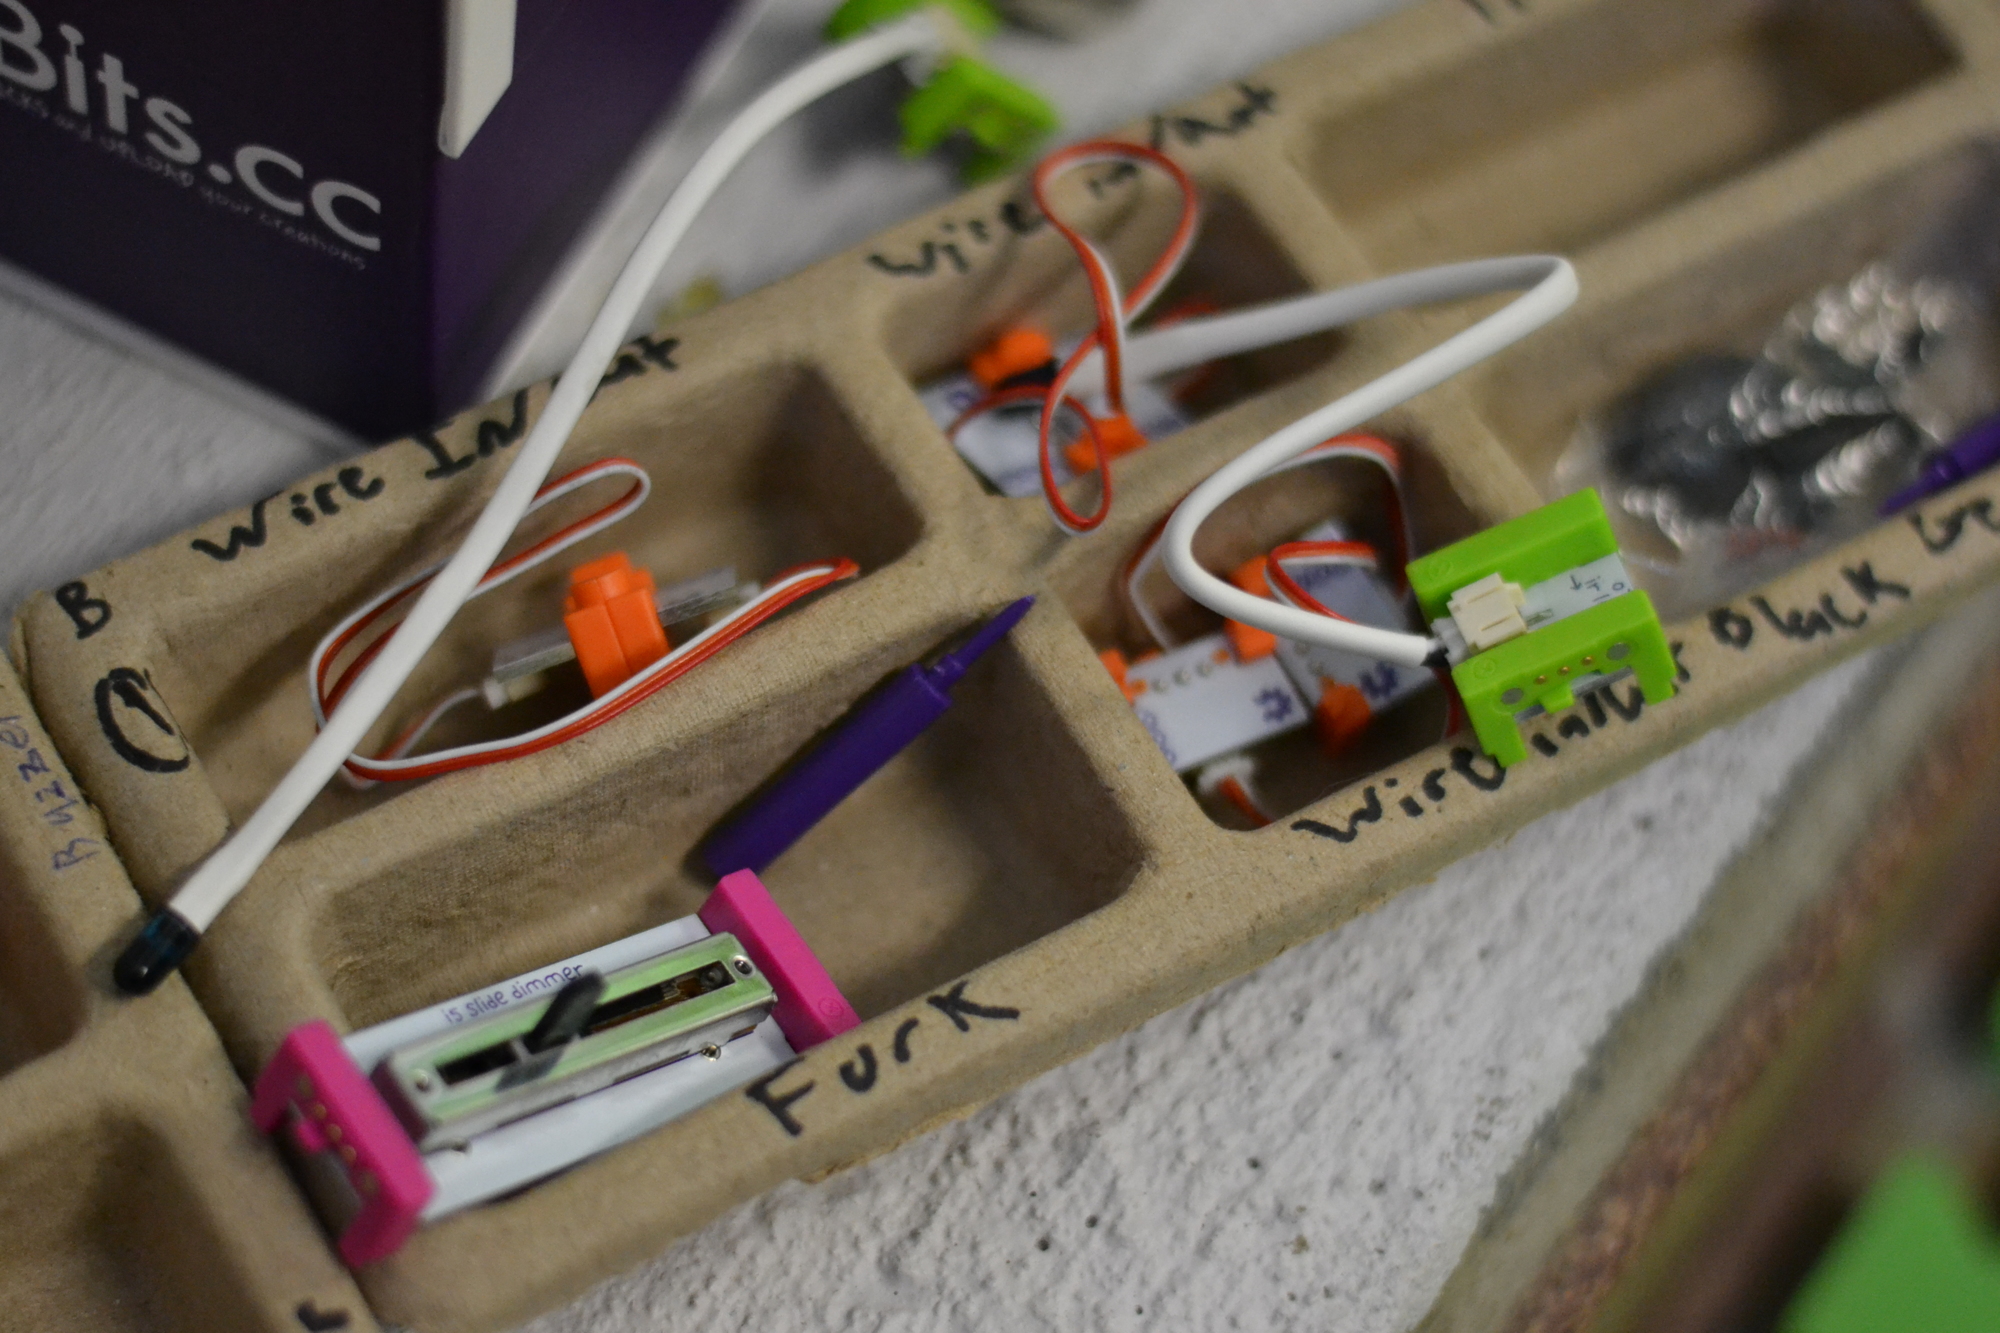 Pieces from the littlebits kits that campers use to make alarms for their obstacle courses.